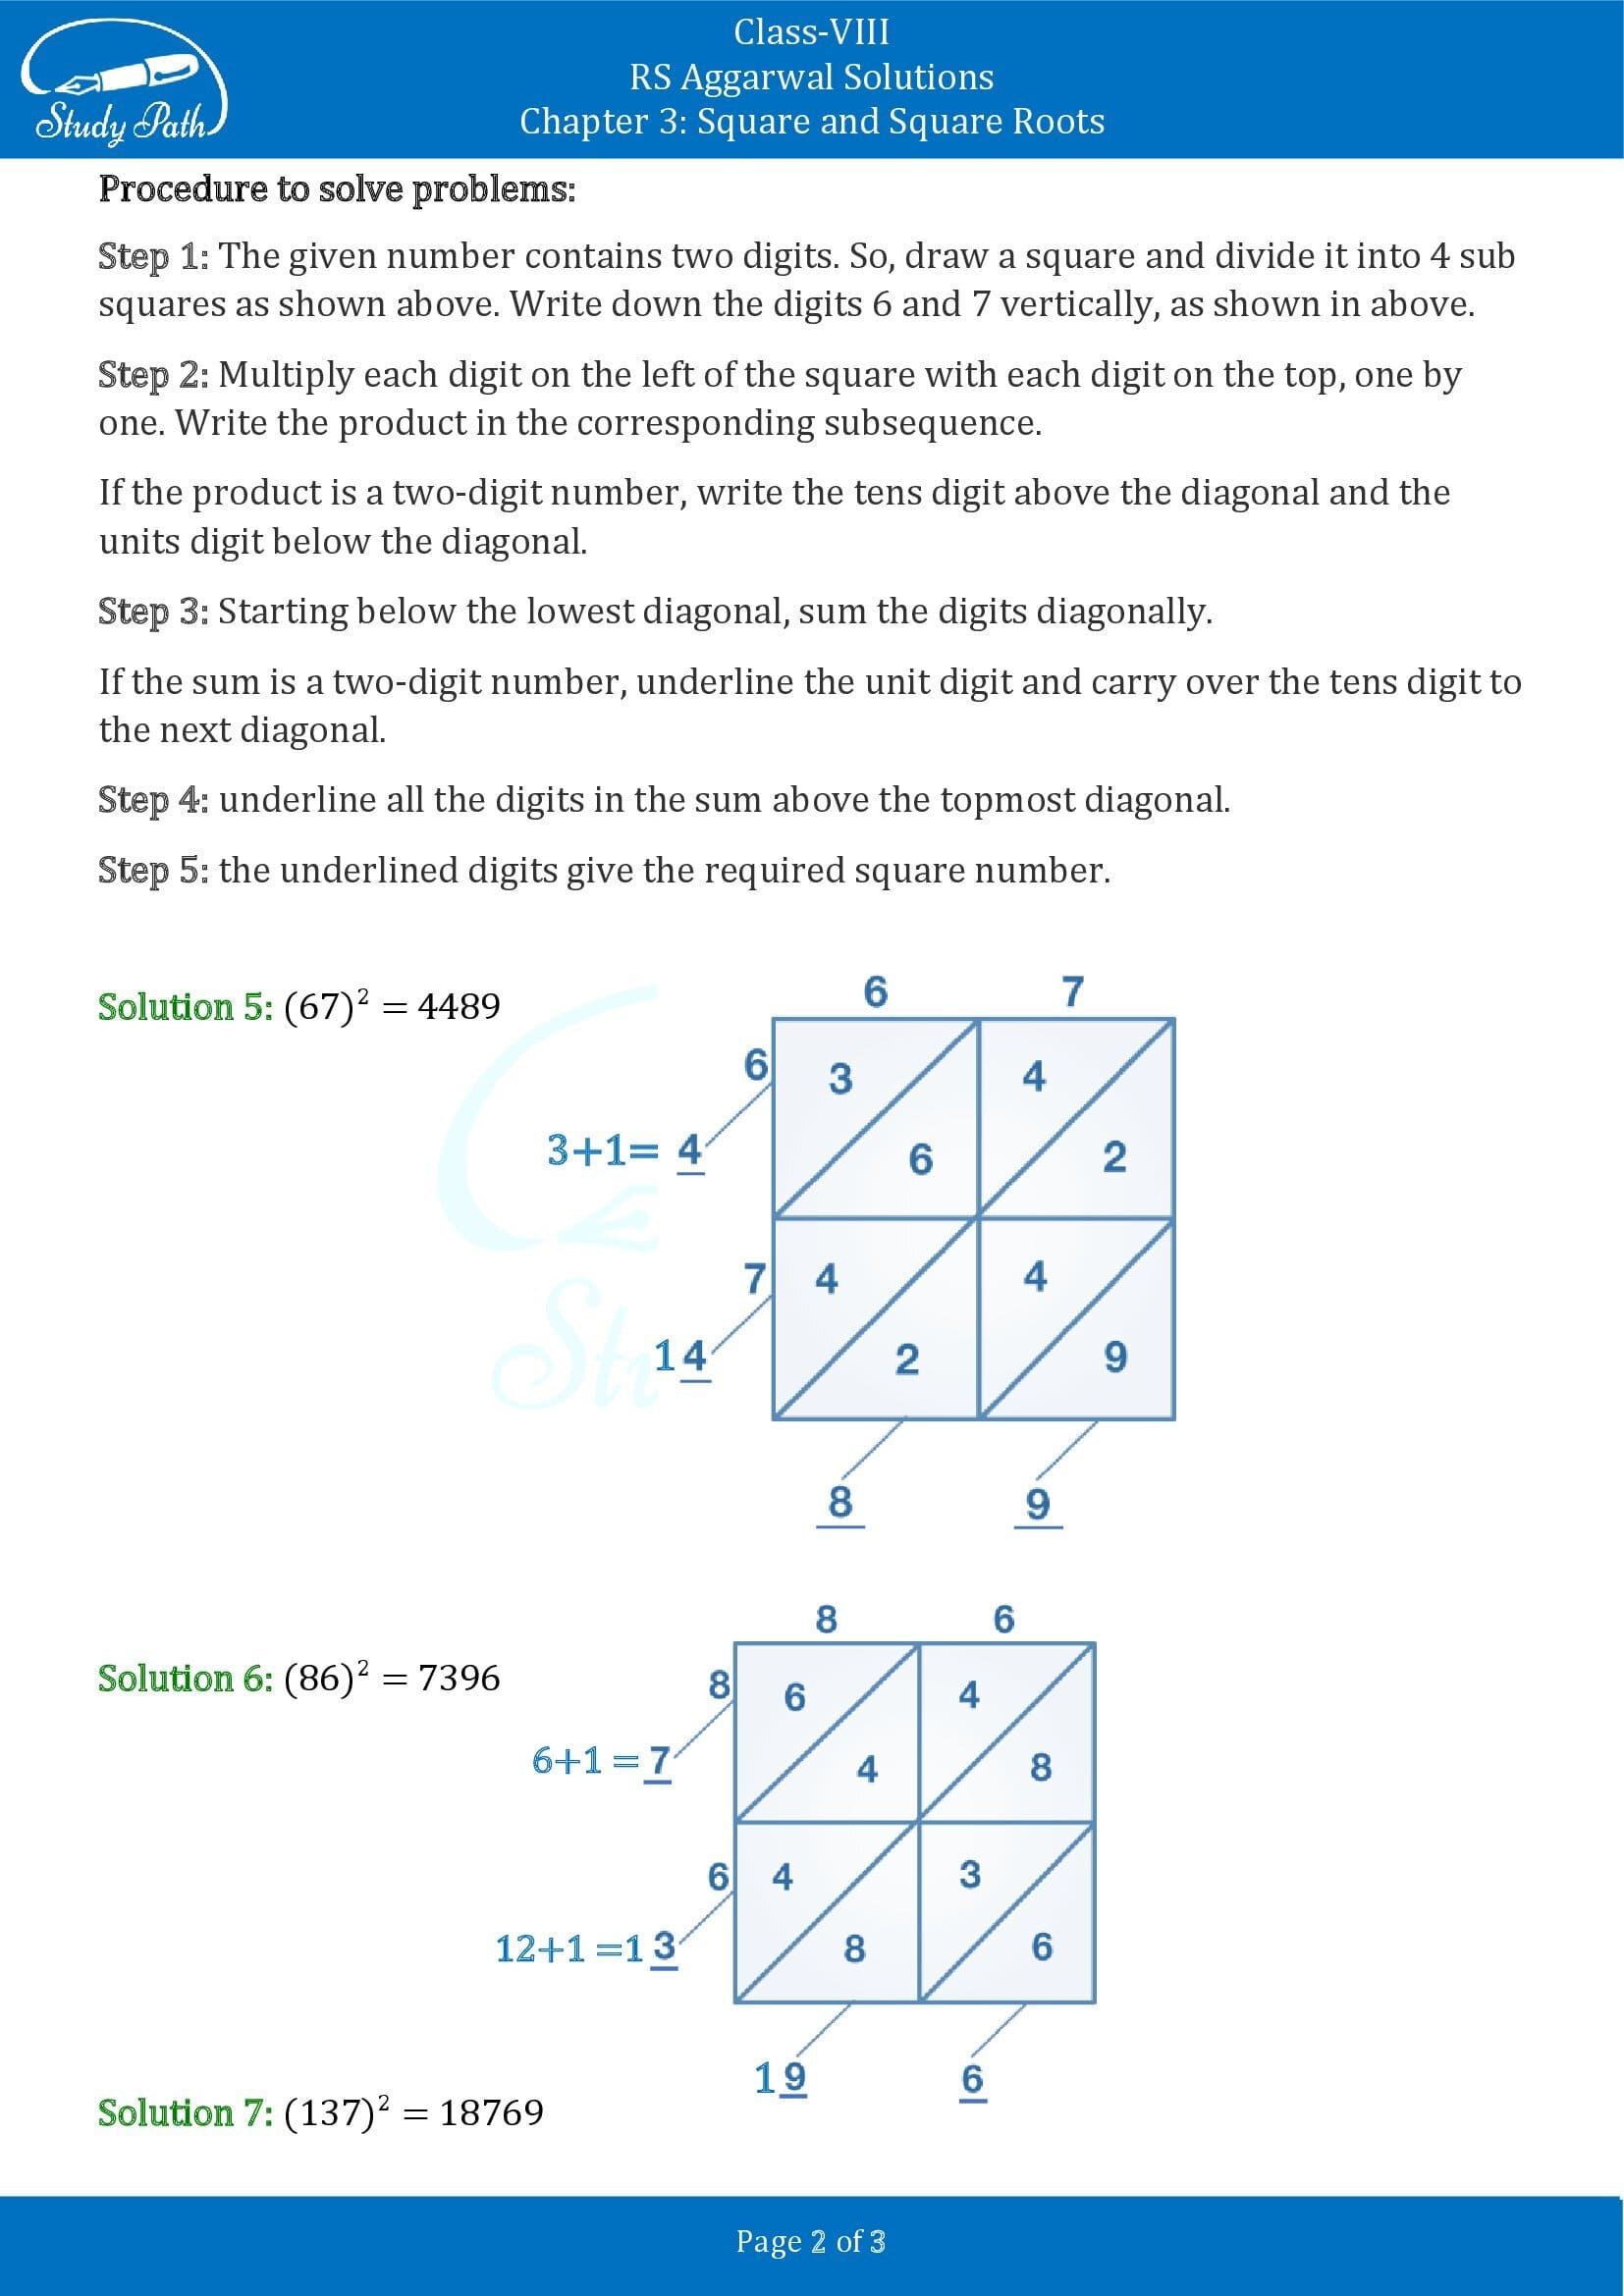 RS Aggarwal Solutions Class 8 Chapter 3 Square and Square Roots Exercise 3C 0002